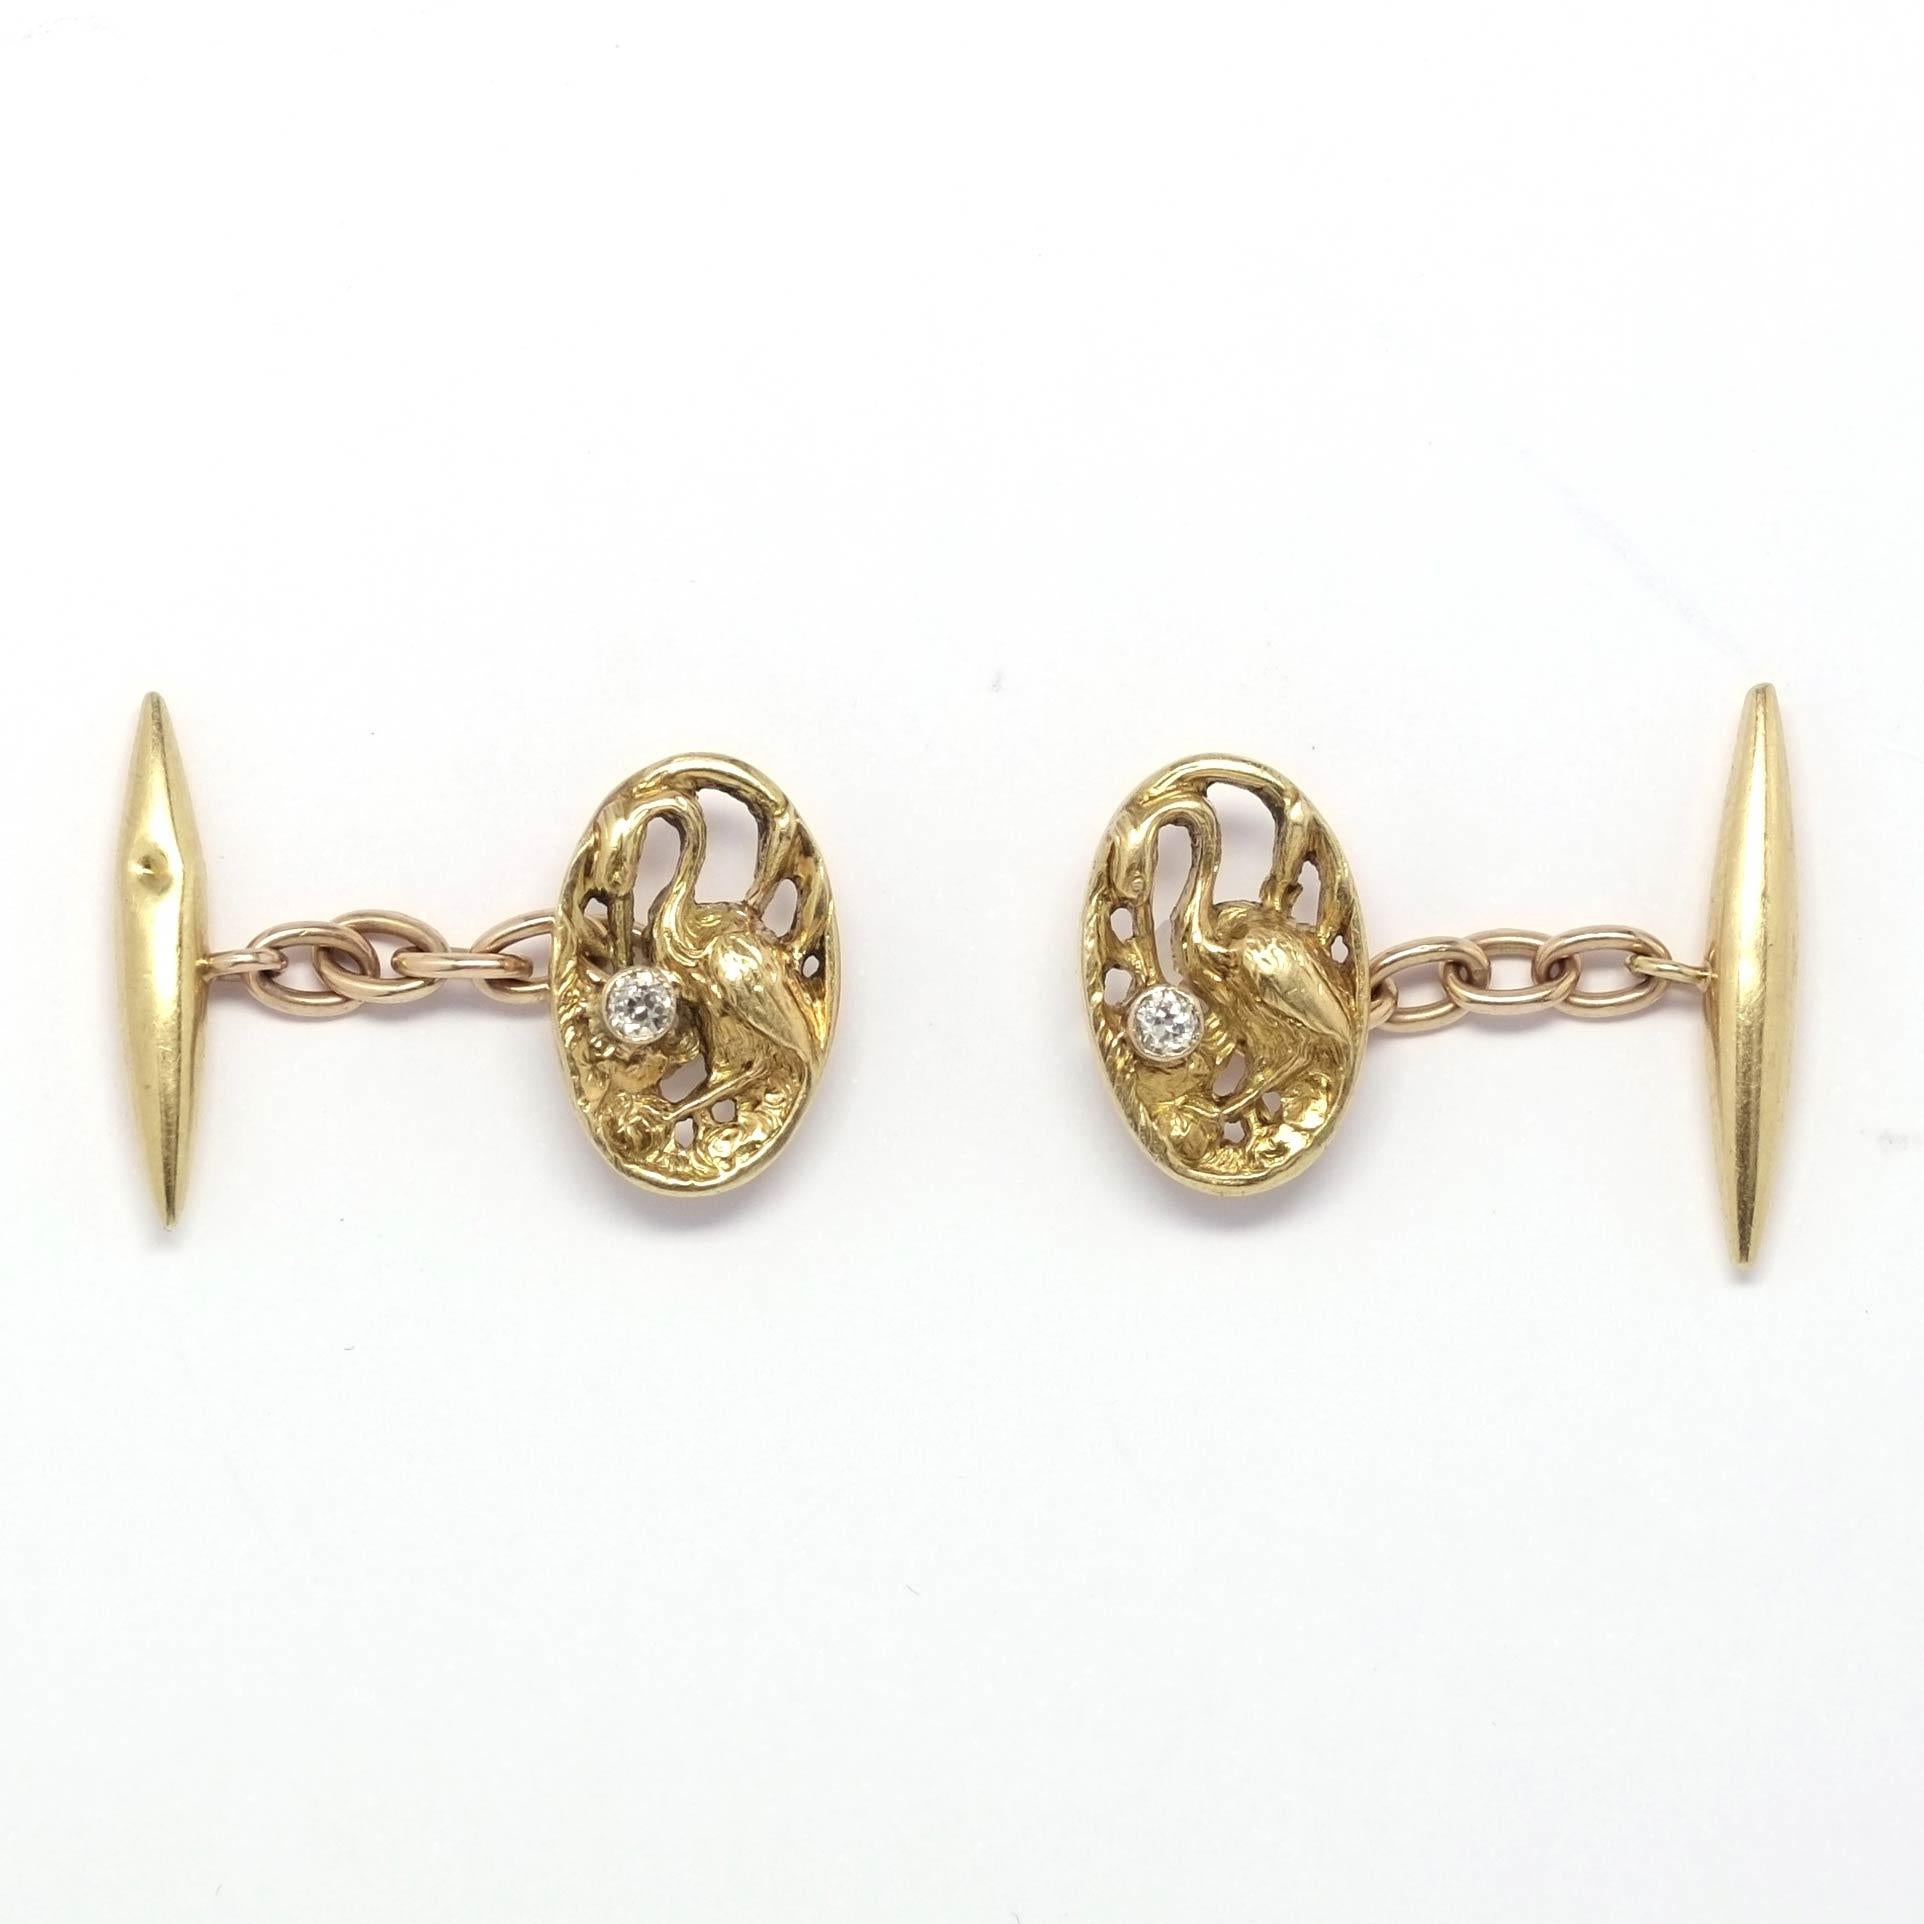 Art Nouveau cufflinks in 18ct yellow gold with round-cut diamonds. This jewel is a miniature sculpture created through the artisanal goldsmithing technique called “lost wax”. According to the essence of Art Nouveau, the luxuriance of flora and fauna